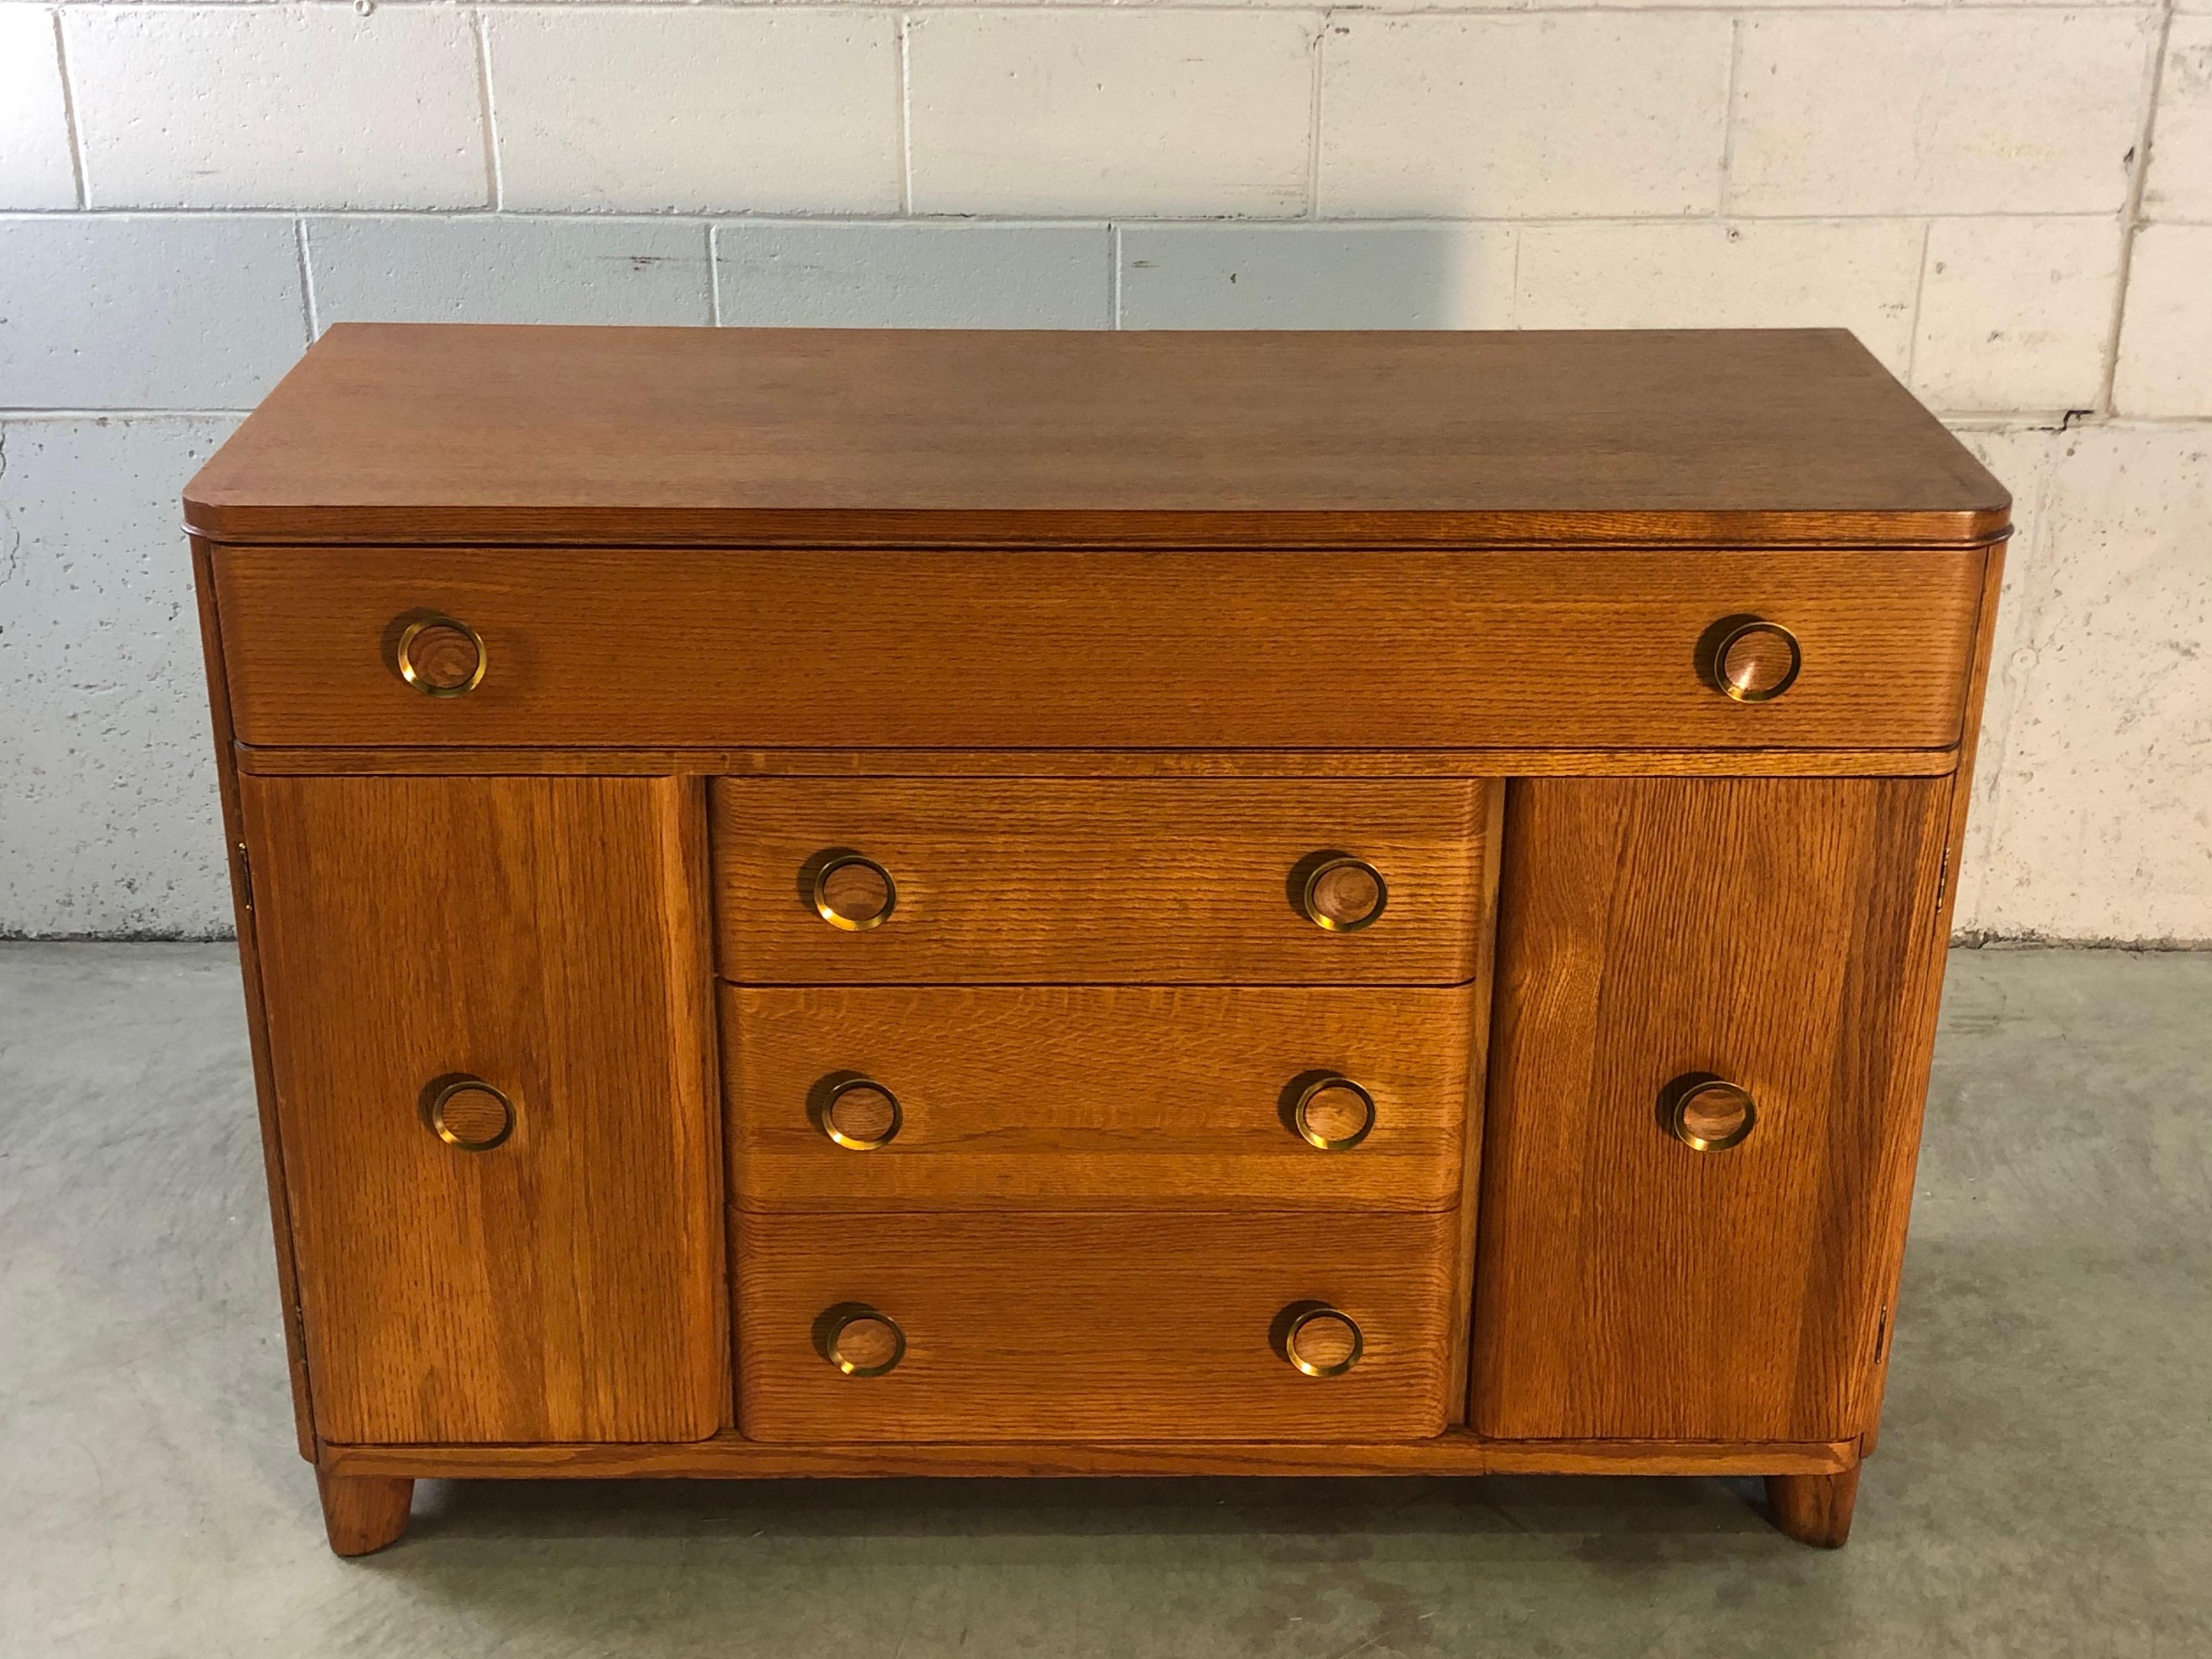 Art Deco oakwood buffet server with four drawers and side storage. The sides have shelves that are adjustable. The pulls are brass with an oak center. Marked inside the drawer. Newly refinished condition.